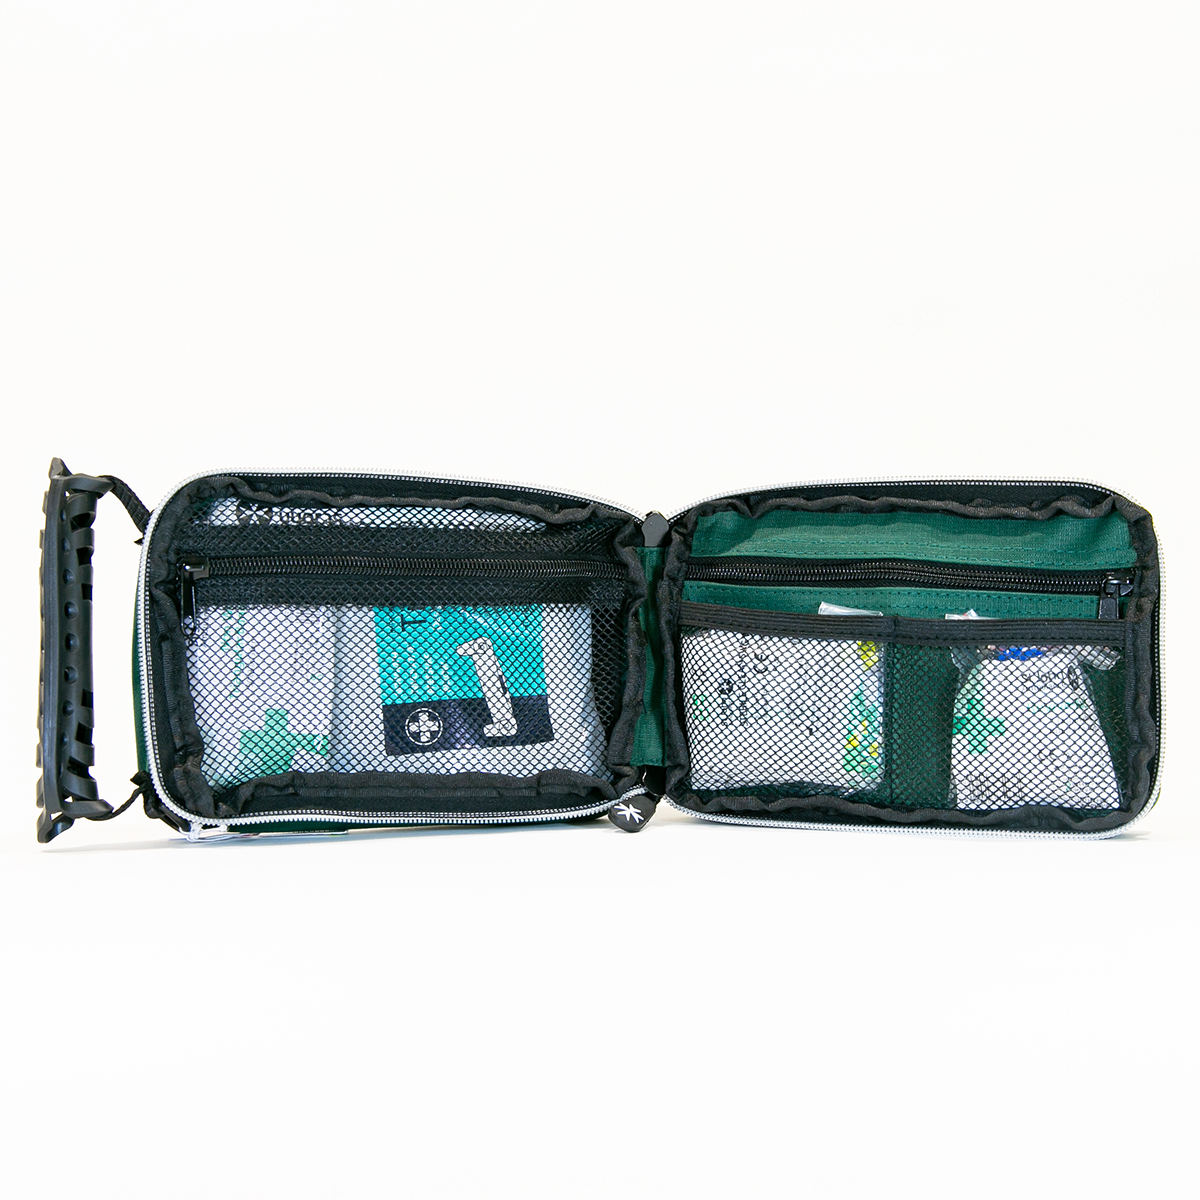 St John Ambulance Zenith Travel and Motoring Workplace First Aid Kit BS 8599-1:2019